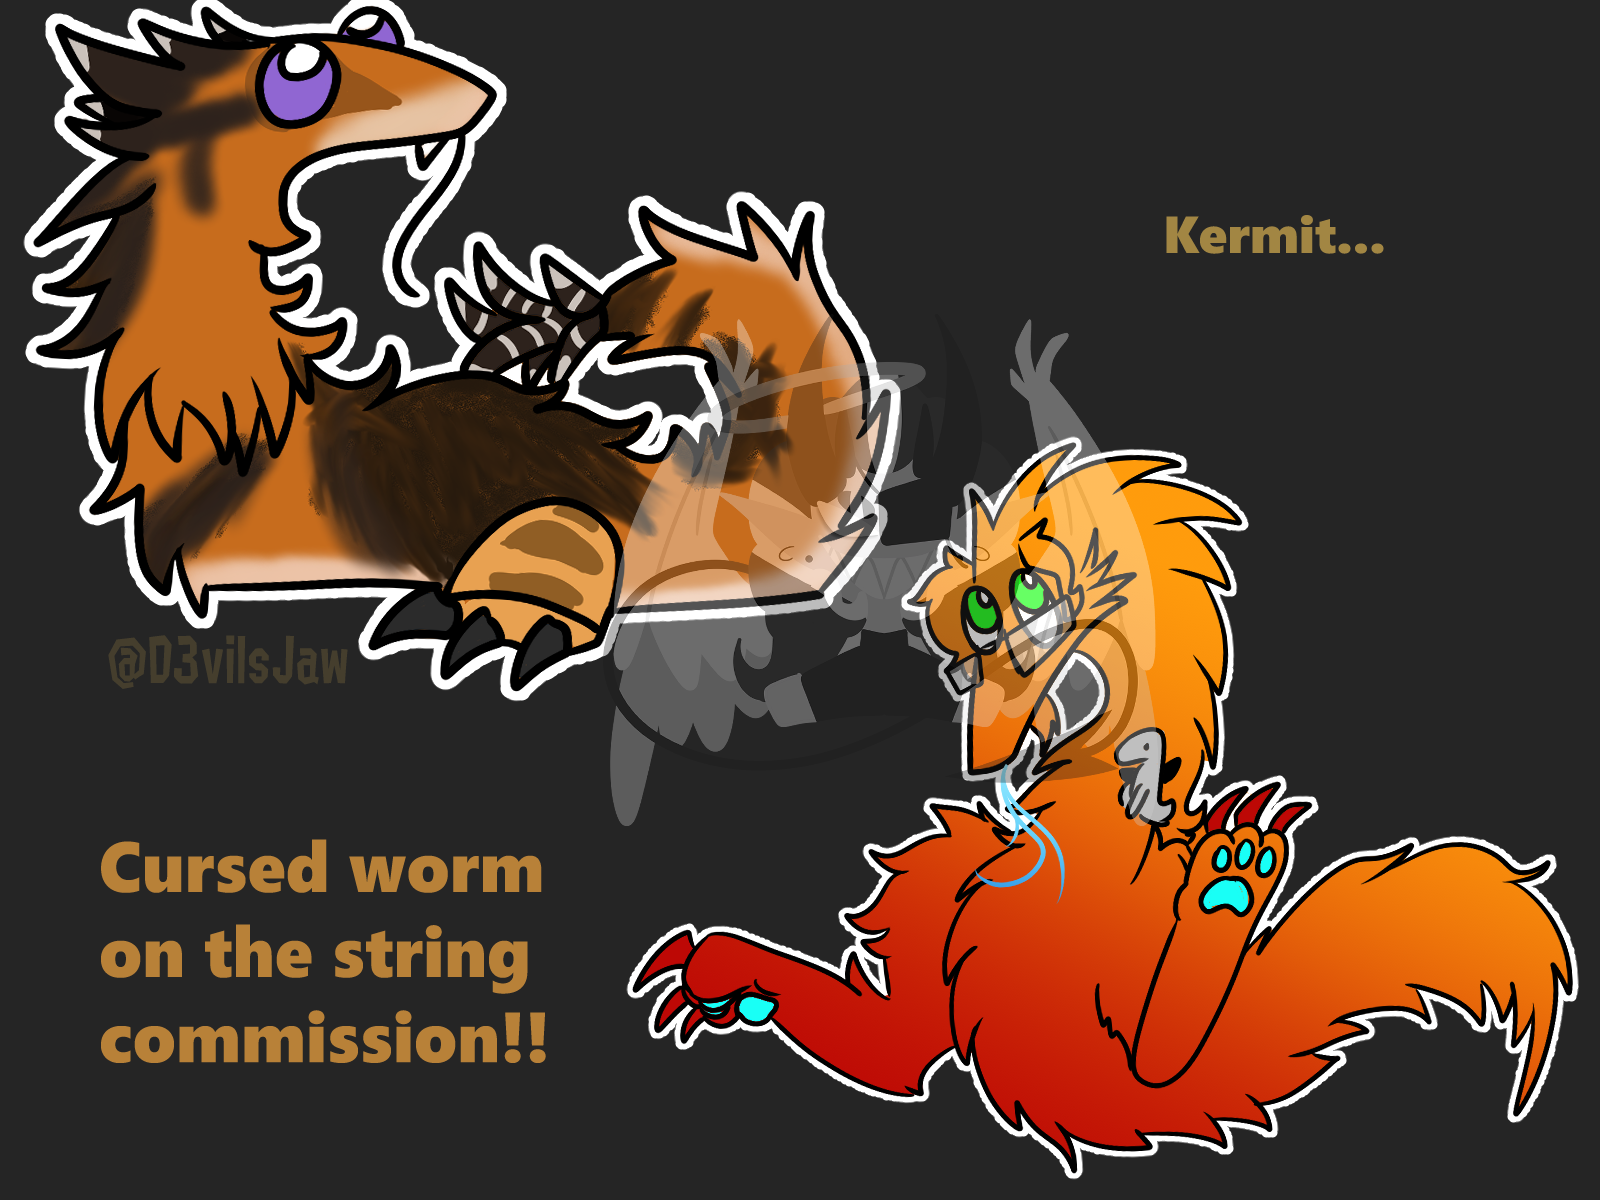 Cursed worm on a string commission by D3viil -- Fur Affinity [dot] net